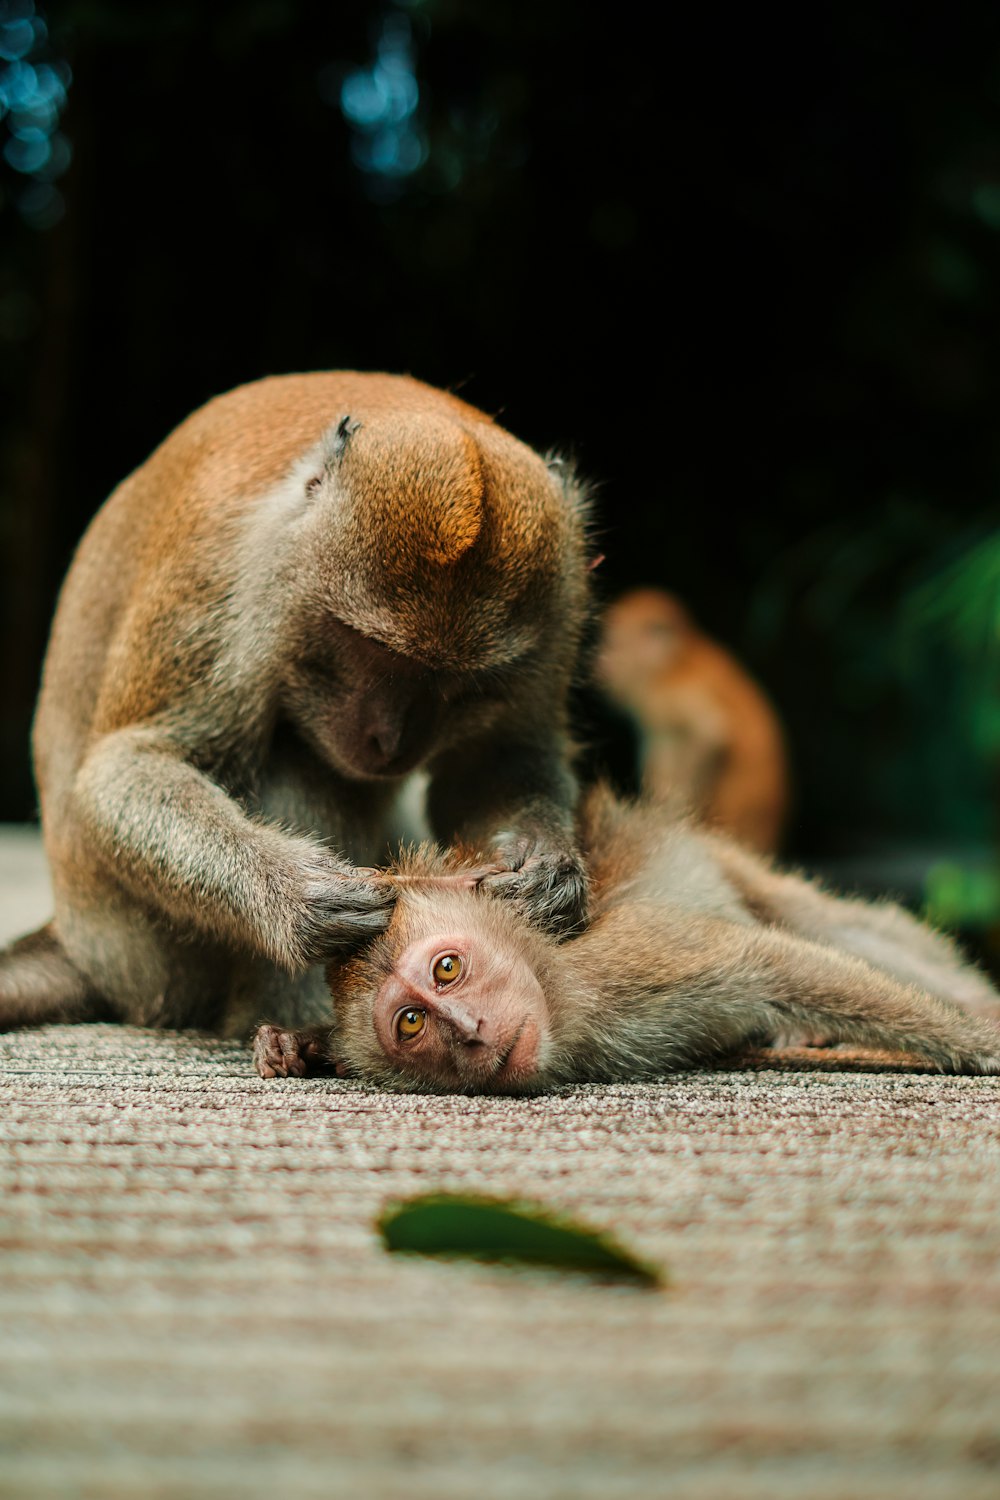 a monkey sitting on top of another monkey on the ground